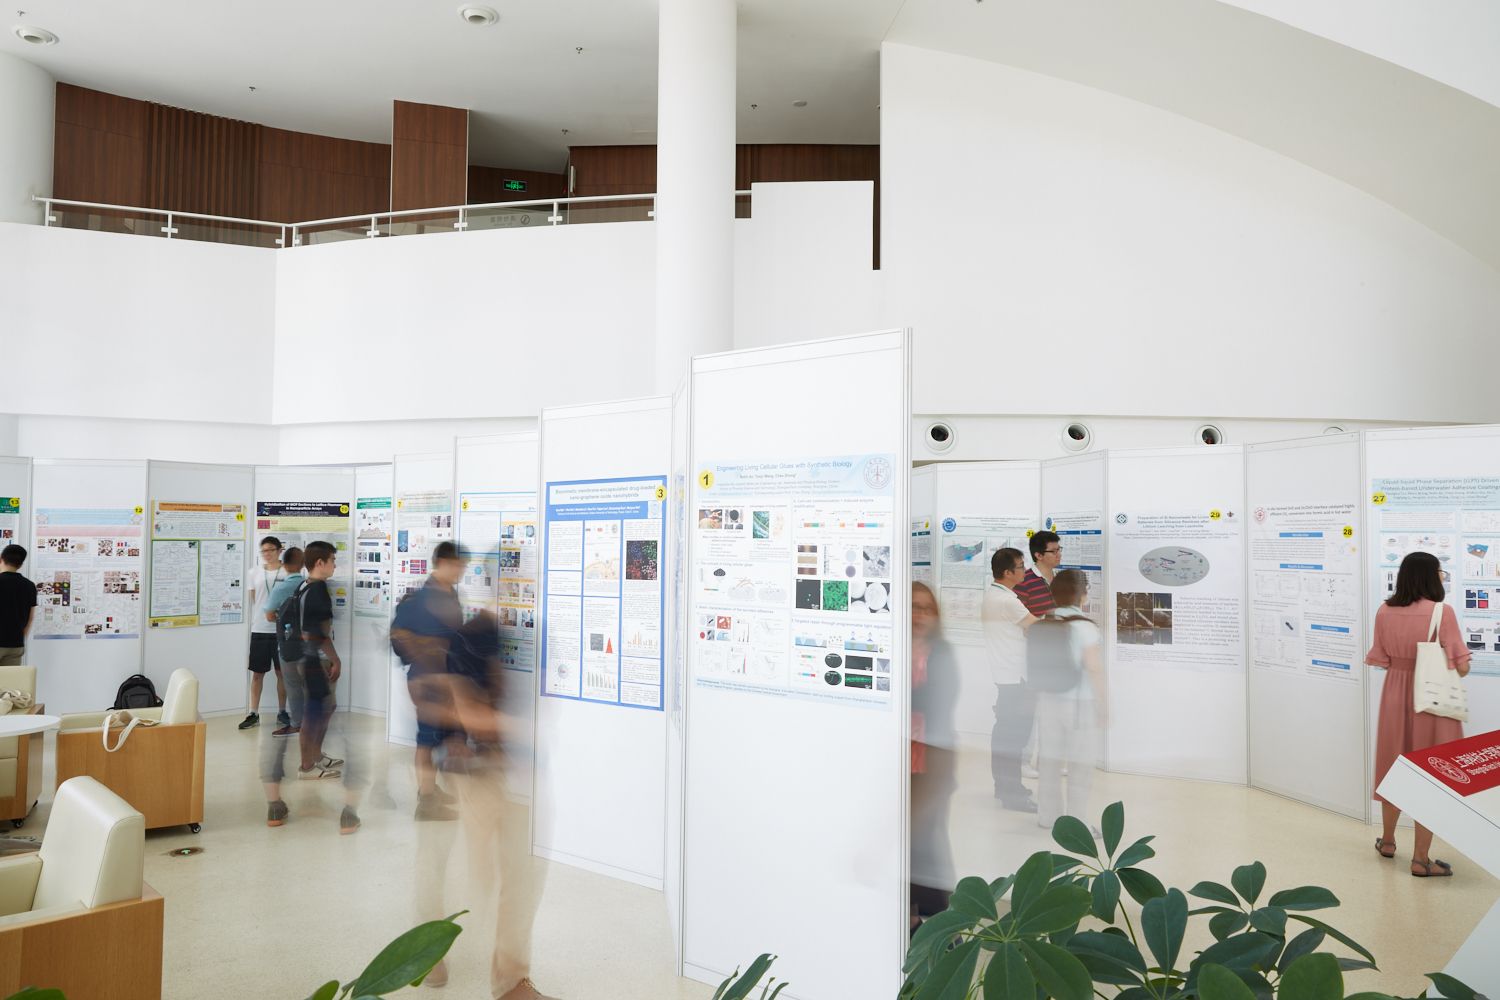 Symposium attendees viewing the student posters on display. Photography: Fei Luo.